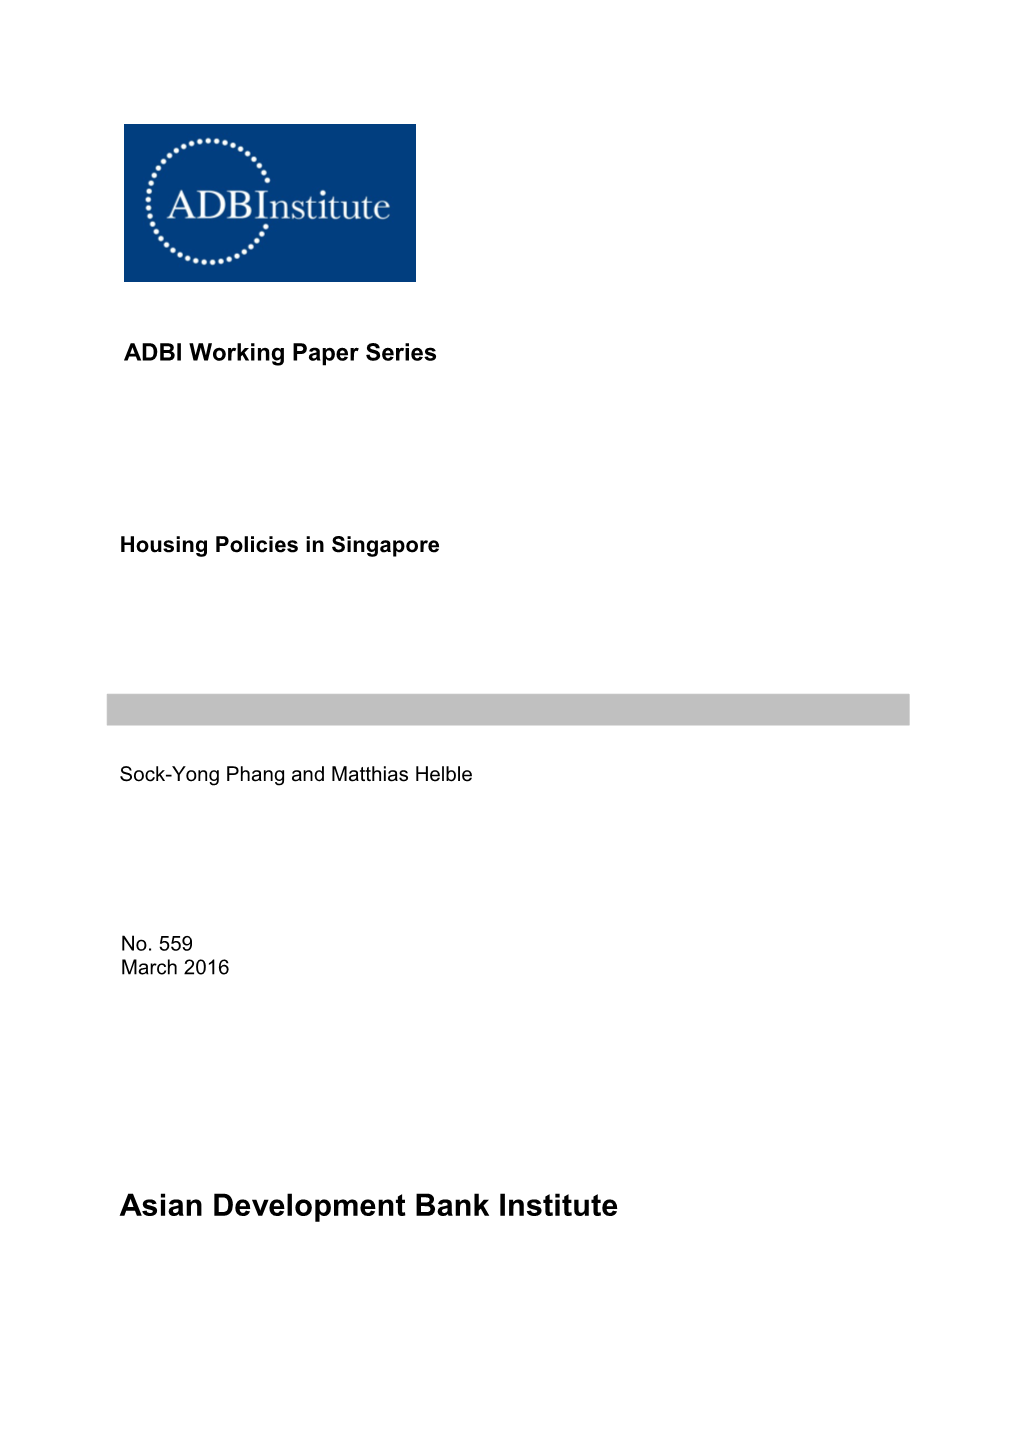 Housing Policies in Singapore